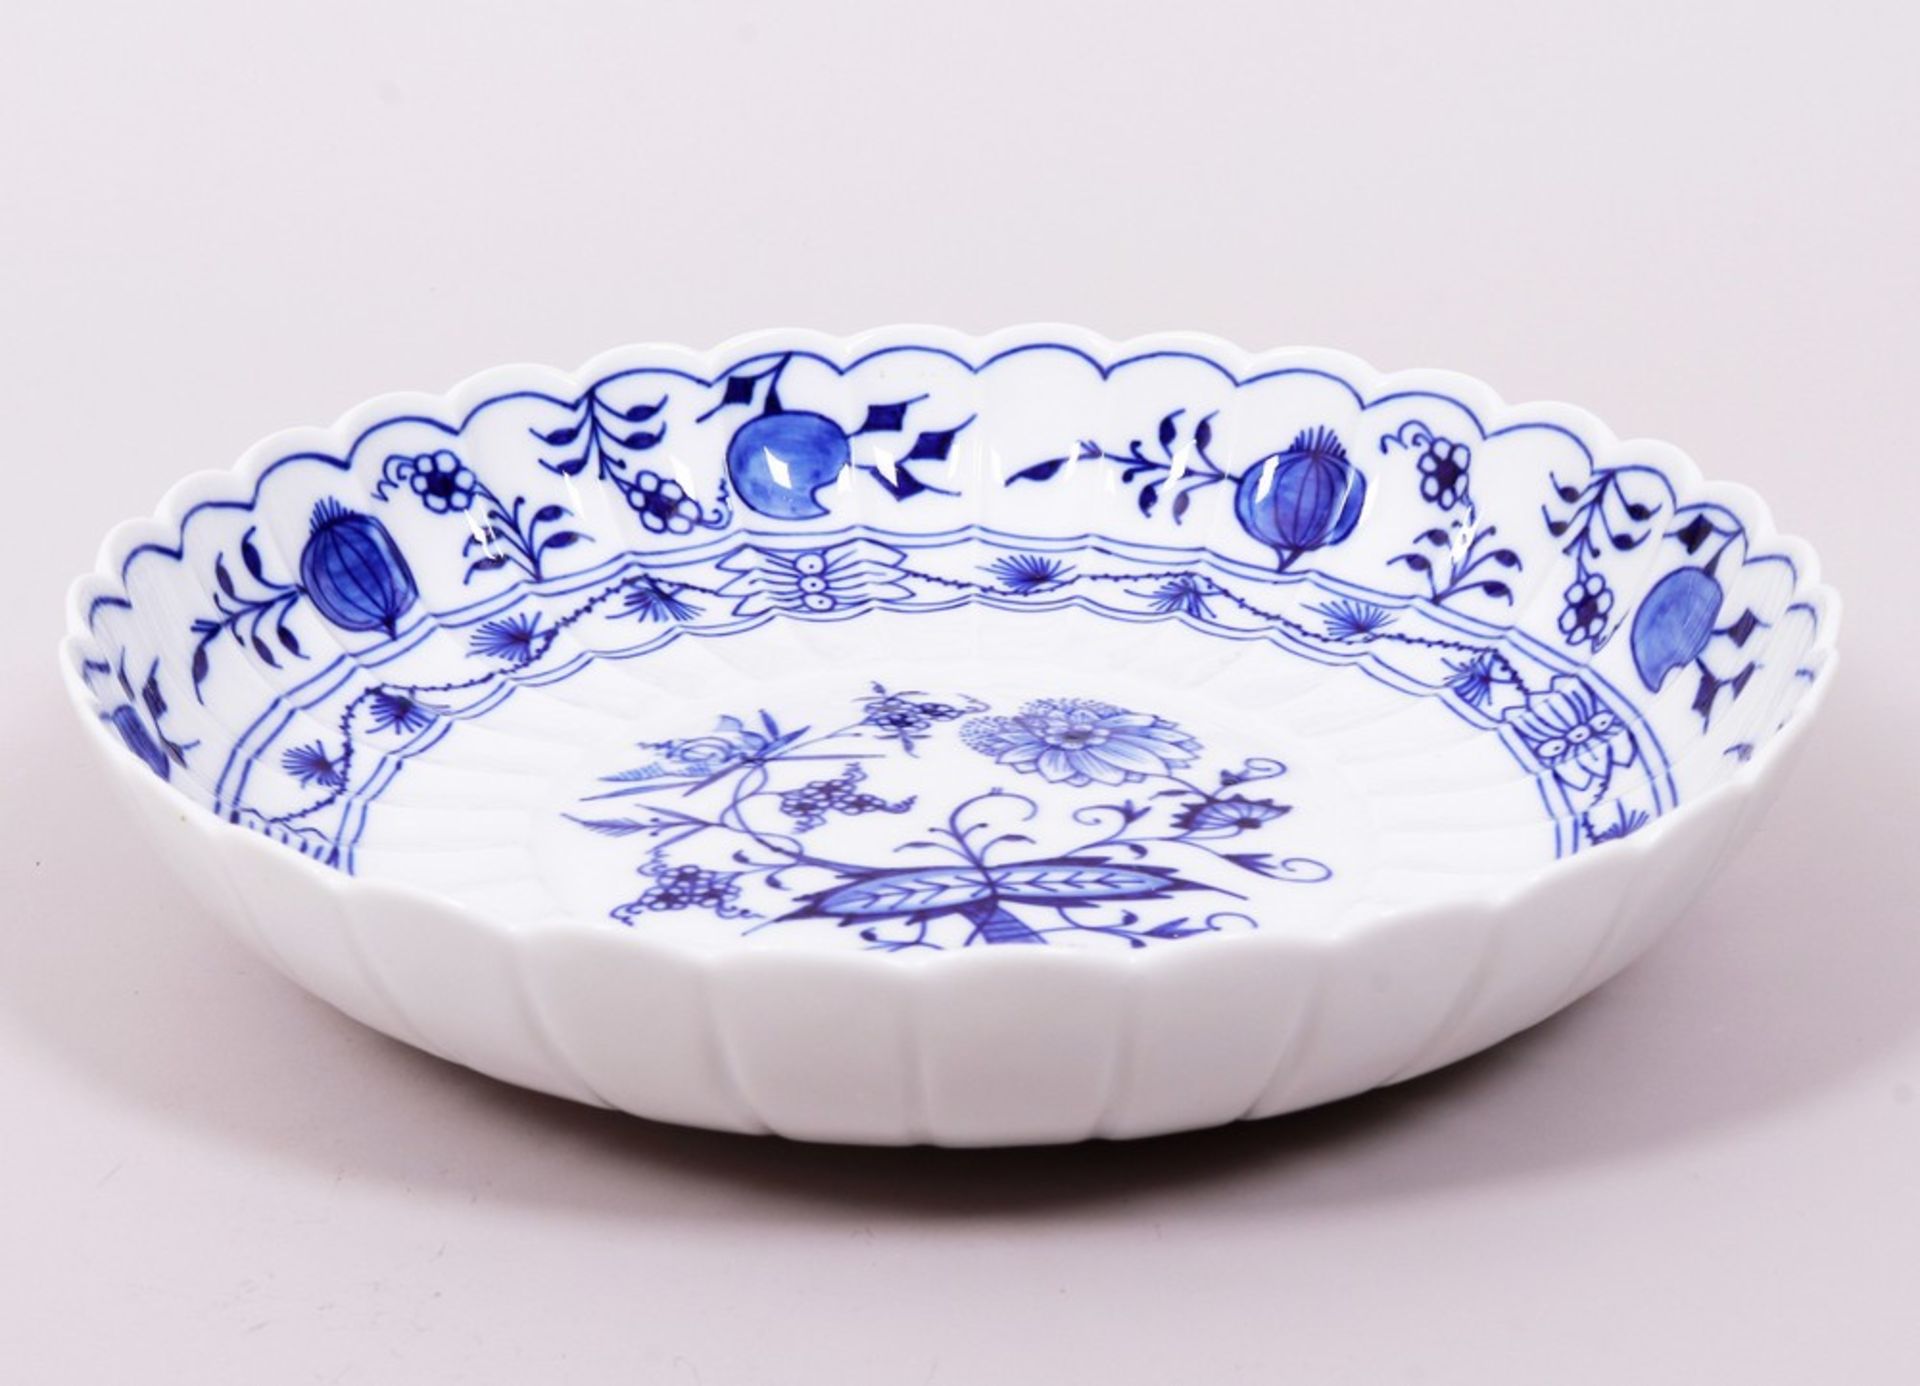 Bowl, Meissen, “onion pattern” decor, 20th C., 2nd choice - Image 3 of 6